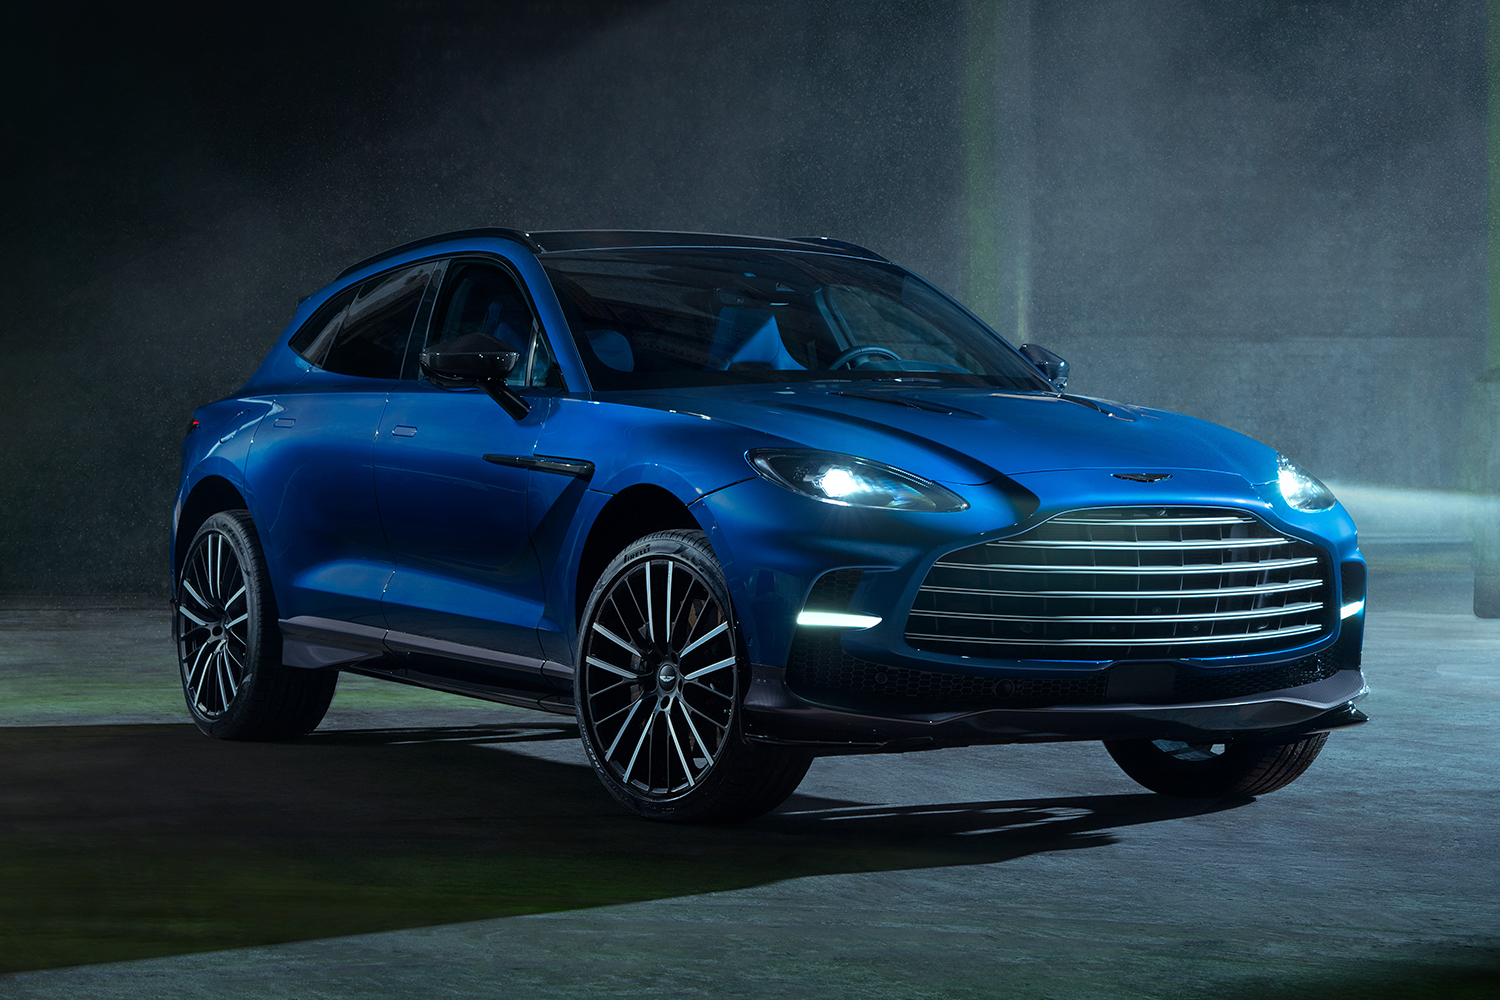 The Aston Martin DBX707 SUV, a high-performance version of the British automaker's DBX vehicle, in blue with its headlights on